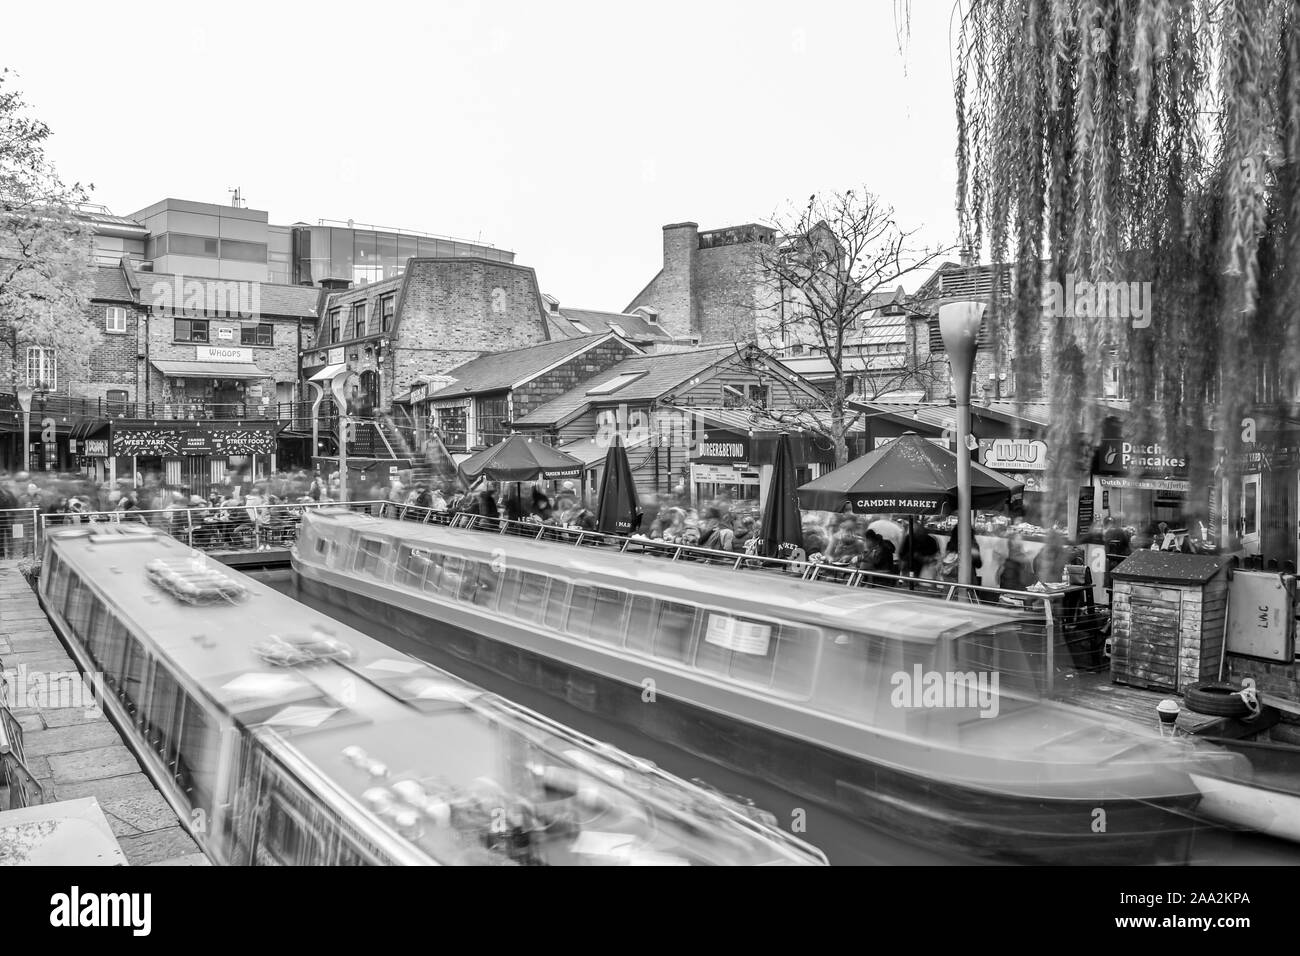 11.09.2019. London, Uk. Camden town's one canal town meeting point. Food market and river trip starting point. Stock Photo